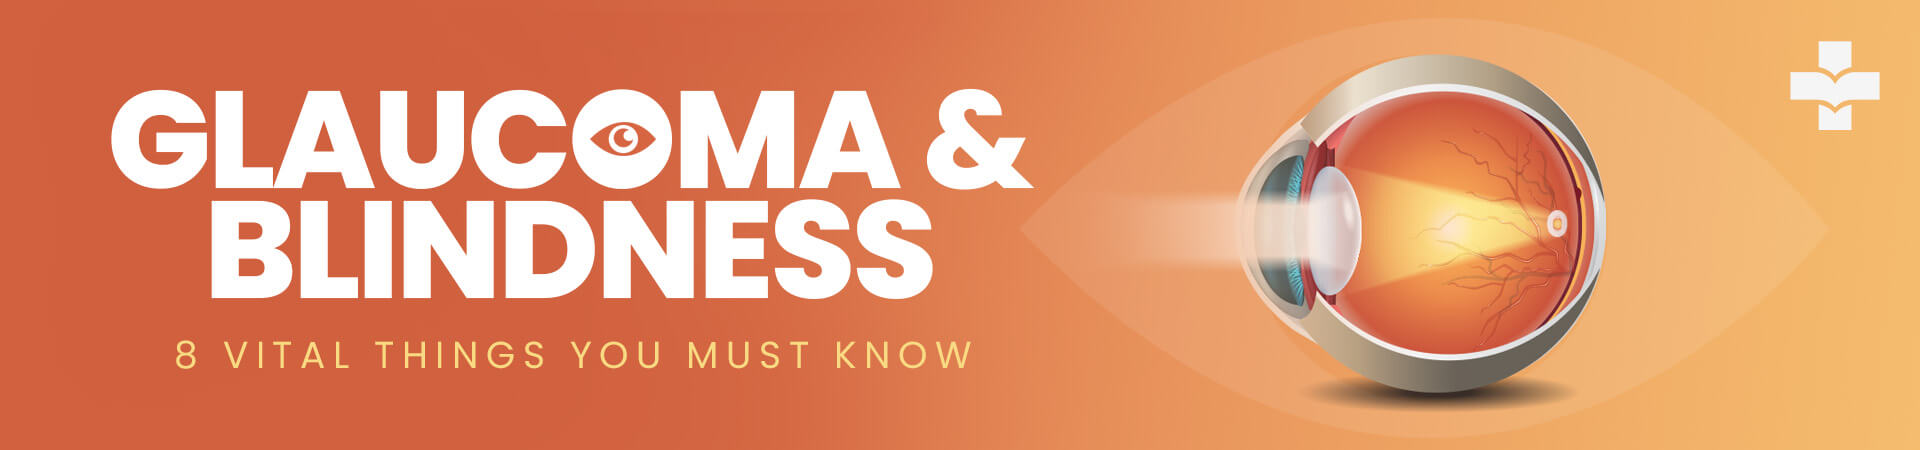 Explore the potential link between glaucoma and blindness. Uncover 8 essential facts that provide insights into the connection and implications of glaucoma on vision loss.